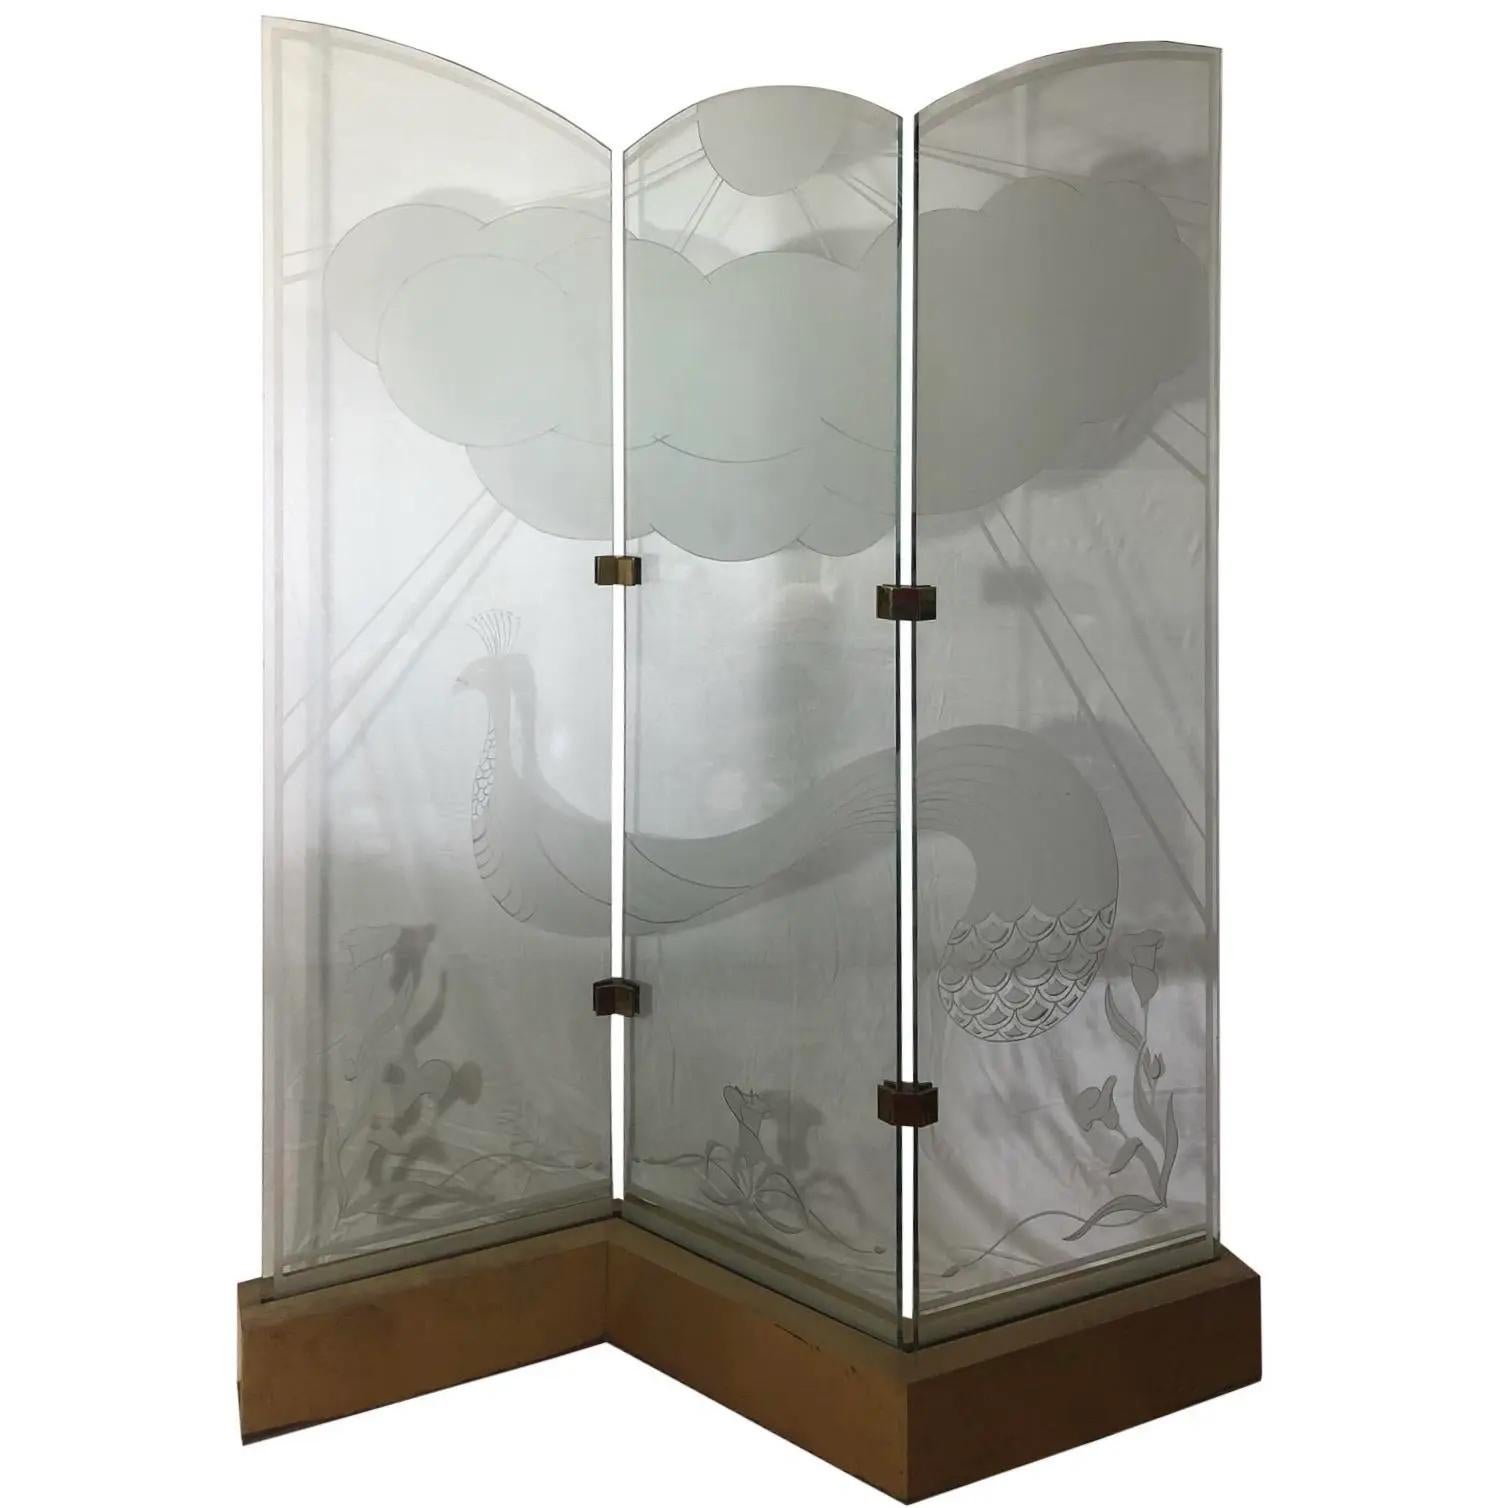 Etched Glass 3 Panel Peacock Lighted Room Divider Screen In Good Condition For Sale In W Allenhurst, NJ